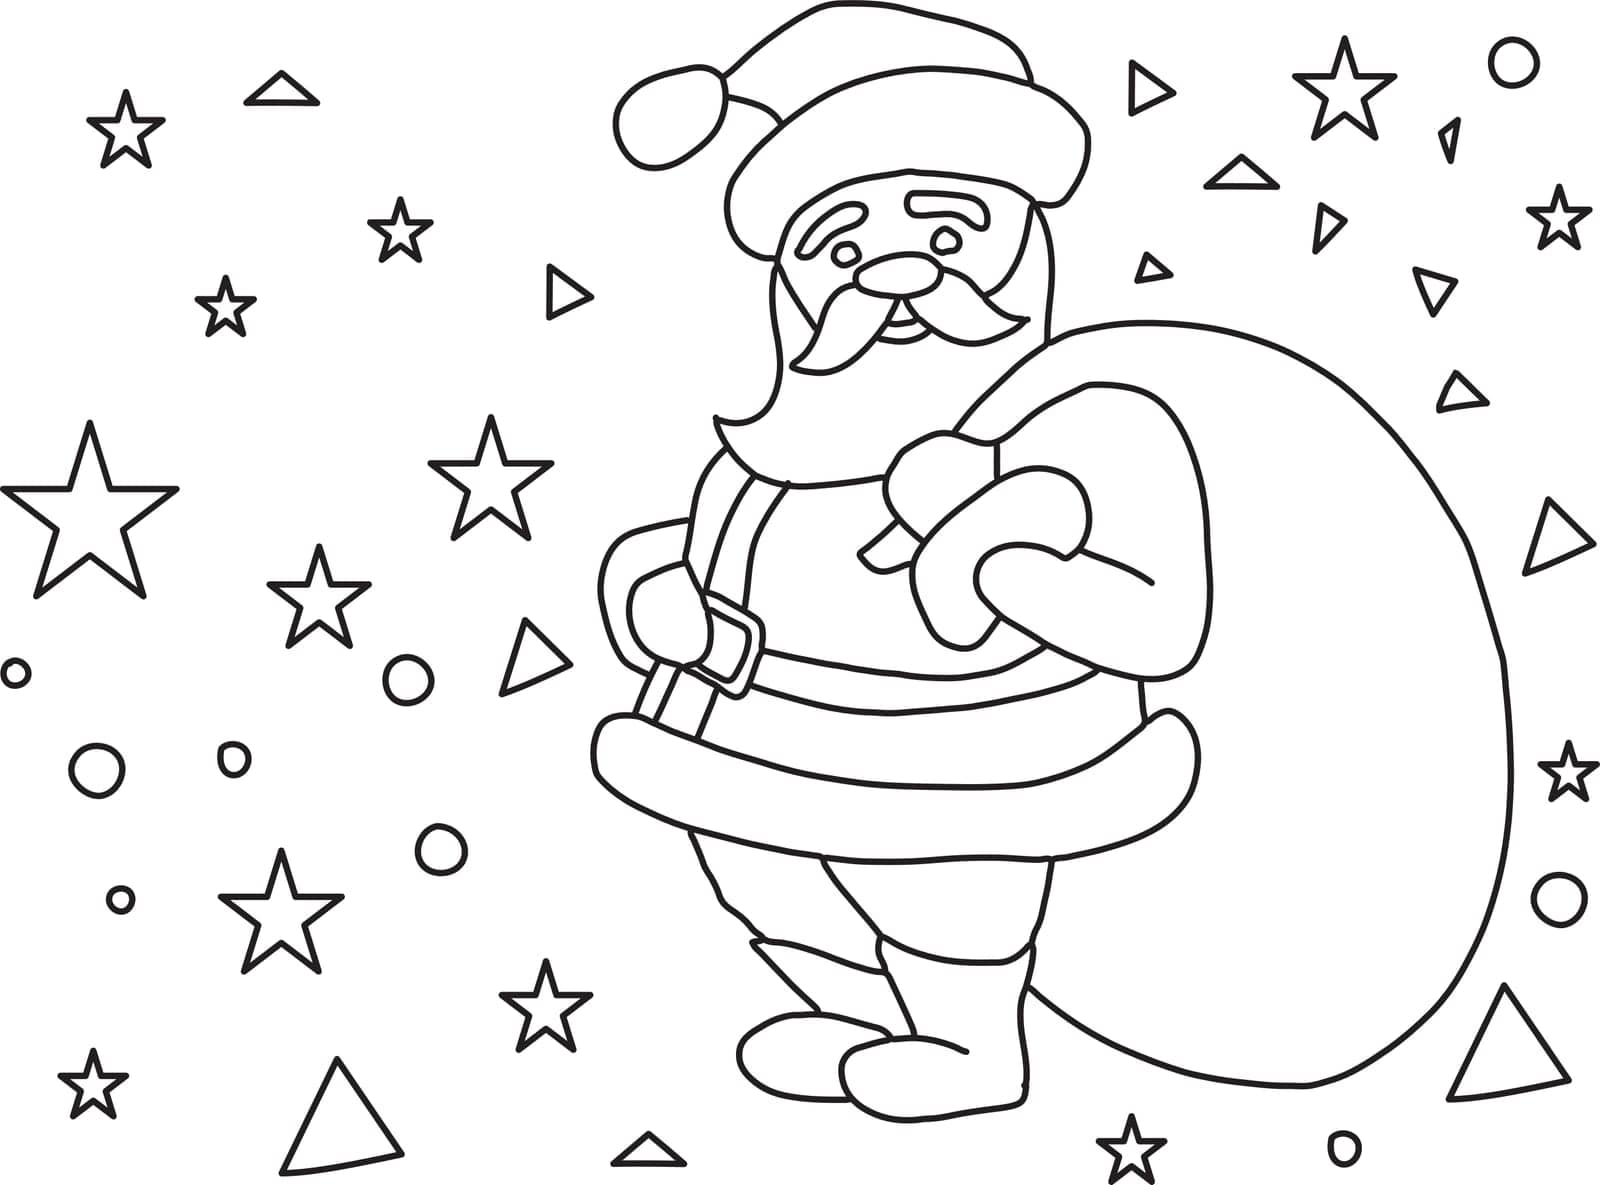 Santa Claus, jolly and round, with a bag full of gifts, brings Christmas cheer to all. For Coloring activity